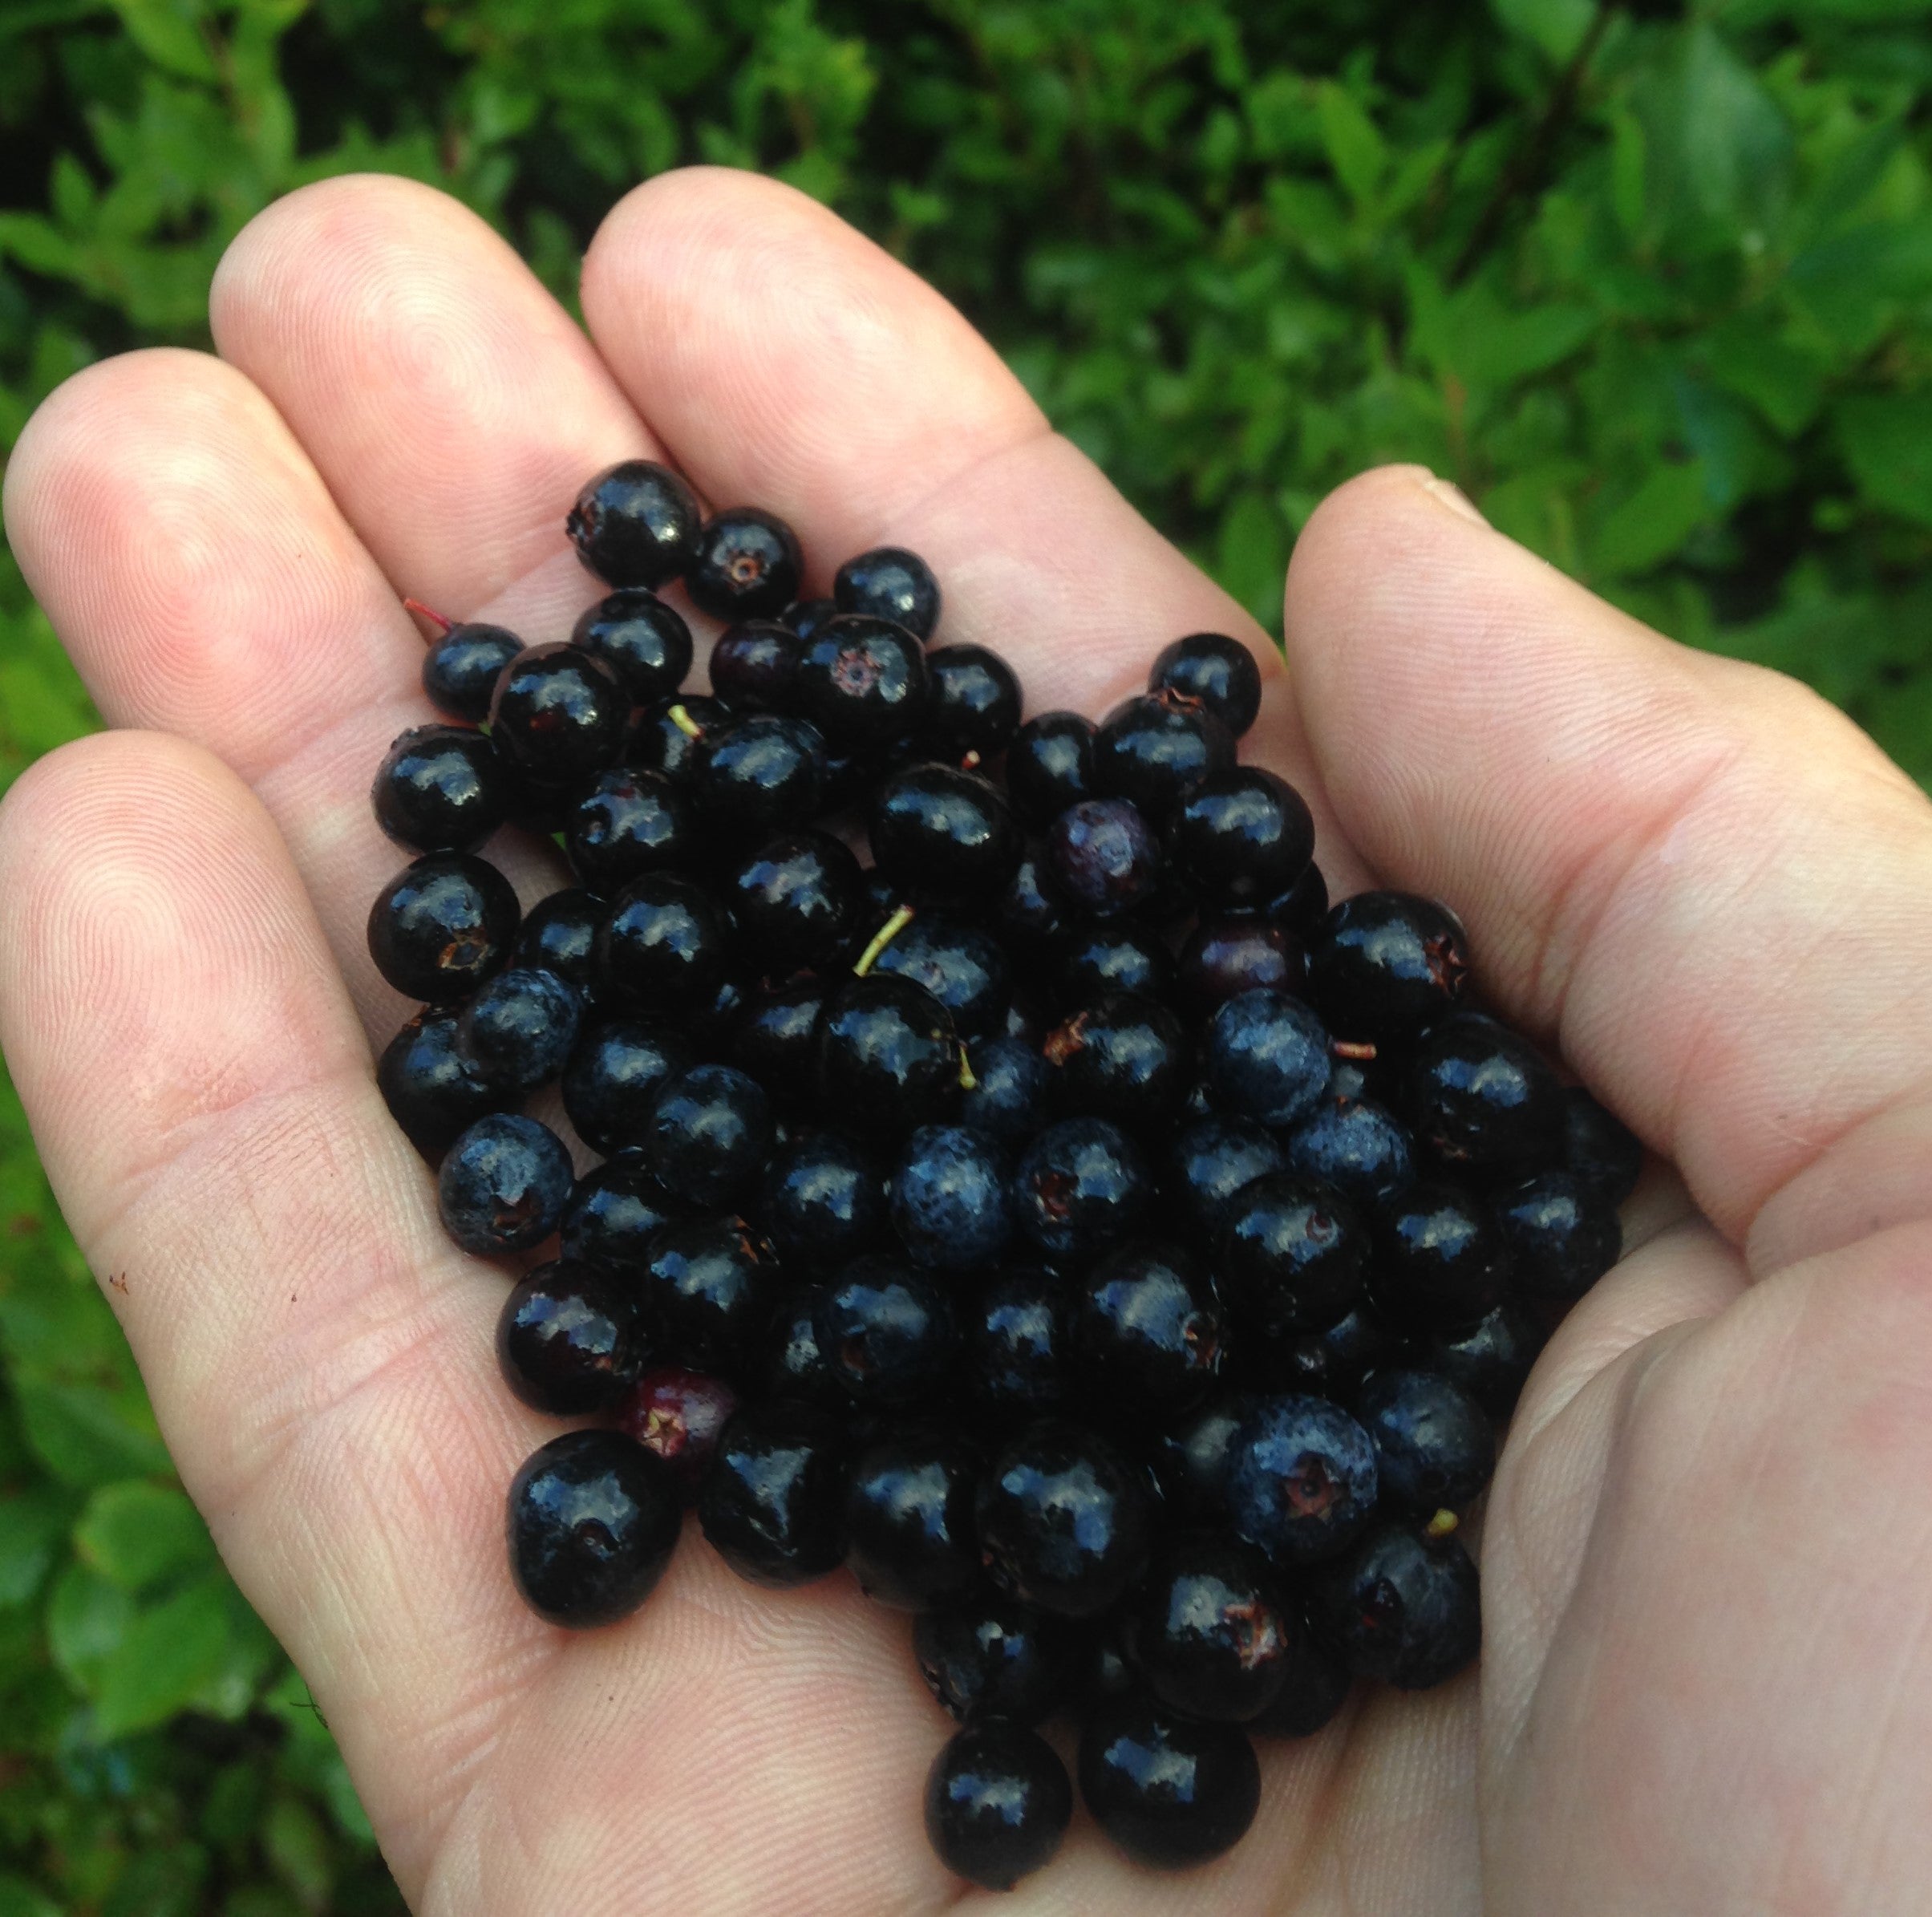 Dolly Sods Wilderness trails are lined with huckleberries (wild blueberries). Which is a main attraction for local bear life.